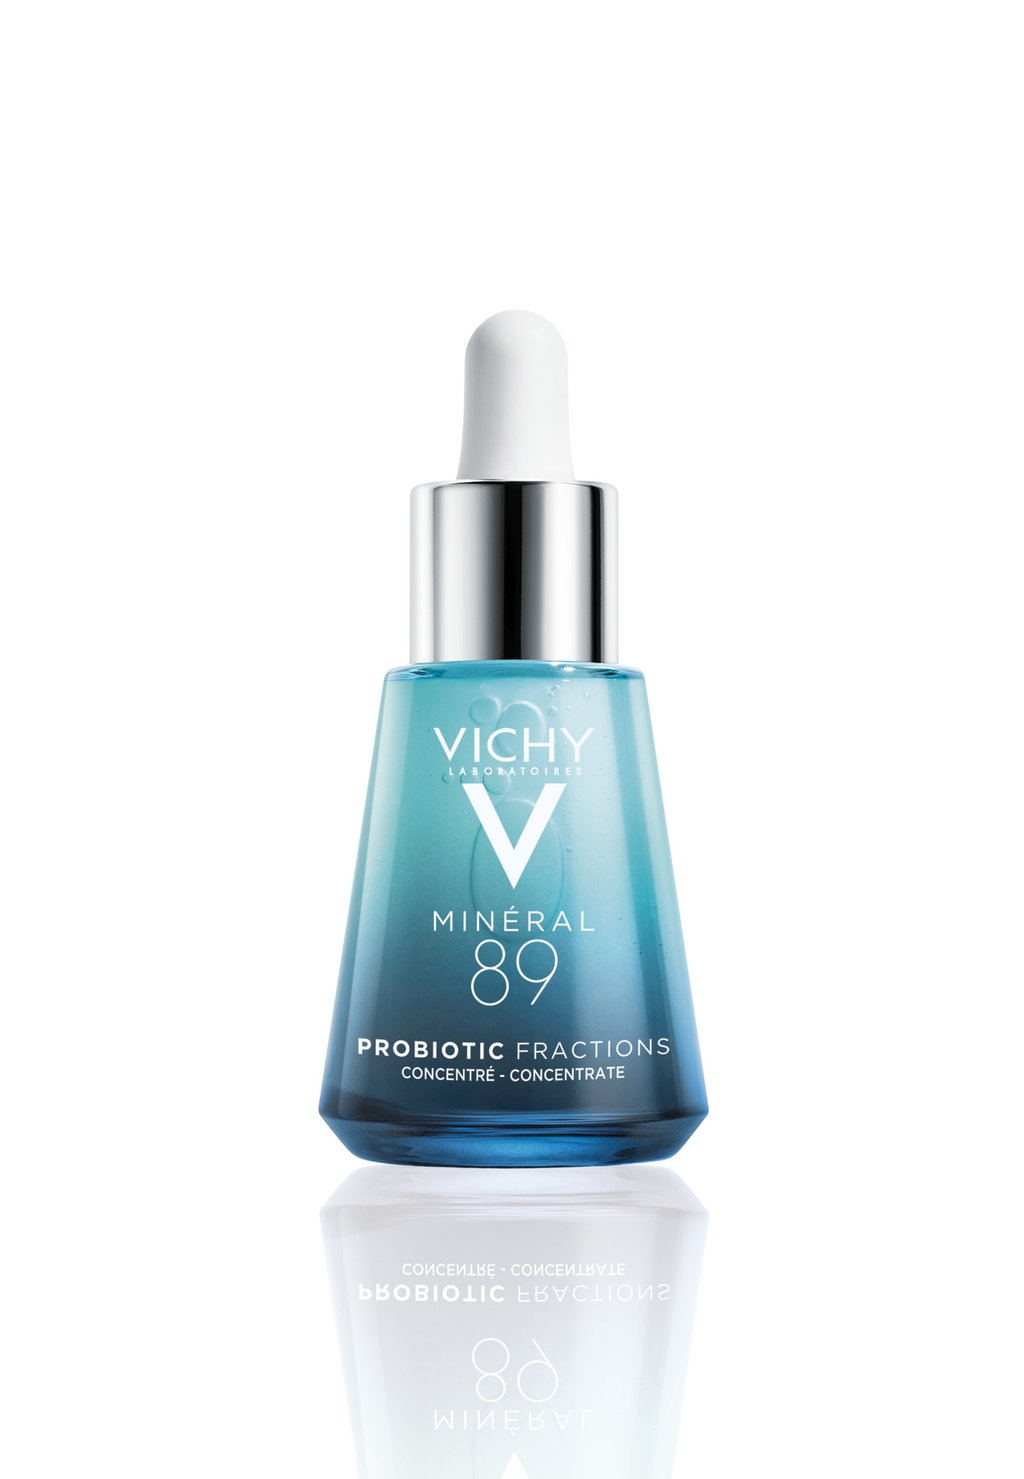 Сыворотка FACE CARE CARING MINÉRAL 89 PROBIOTIC FRACTIONS VICHY